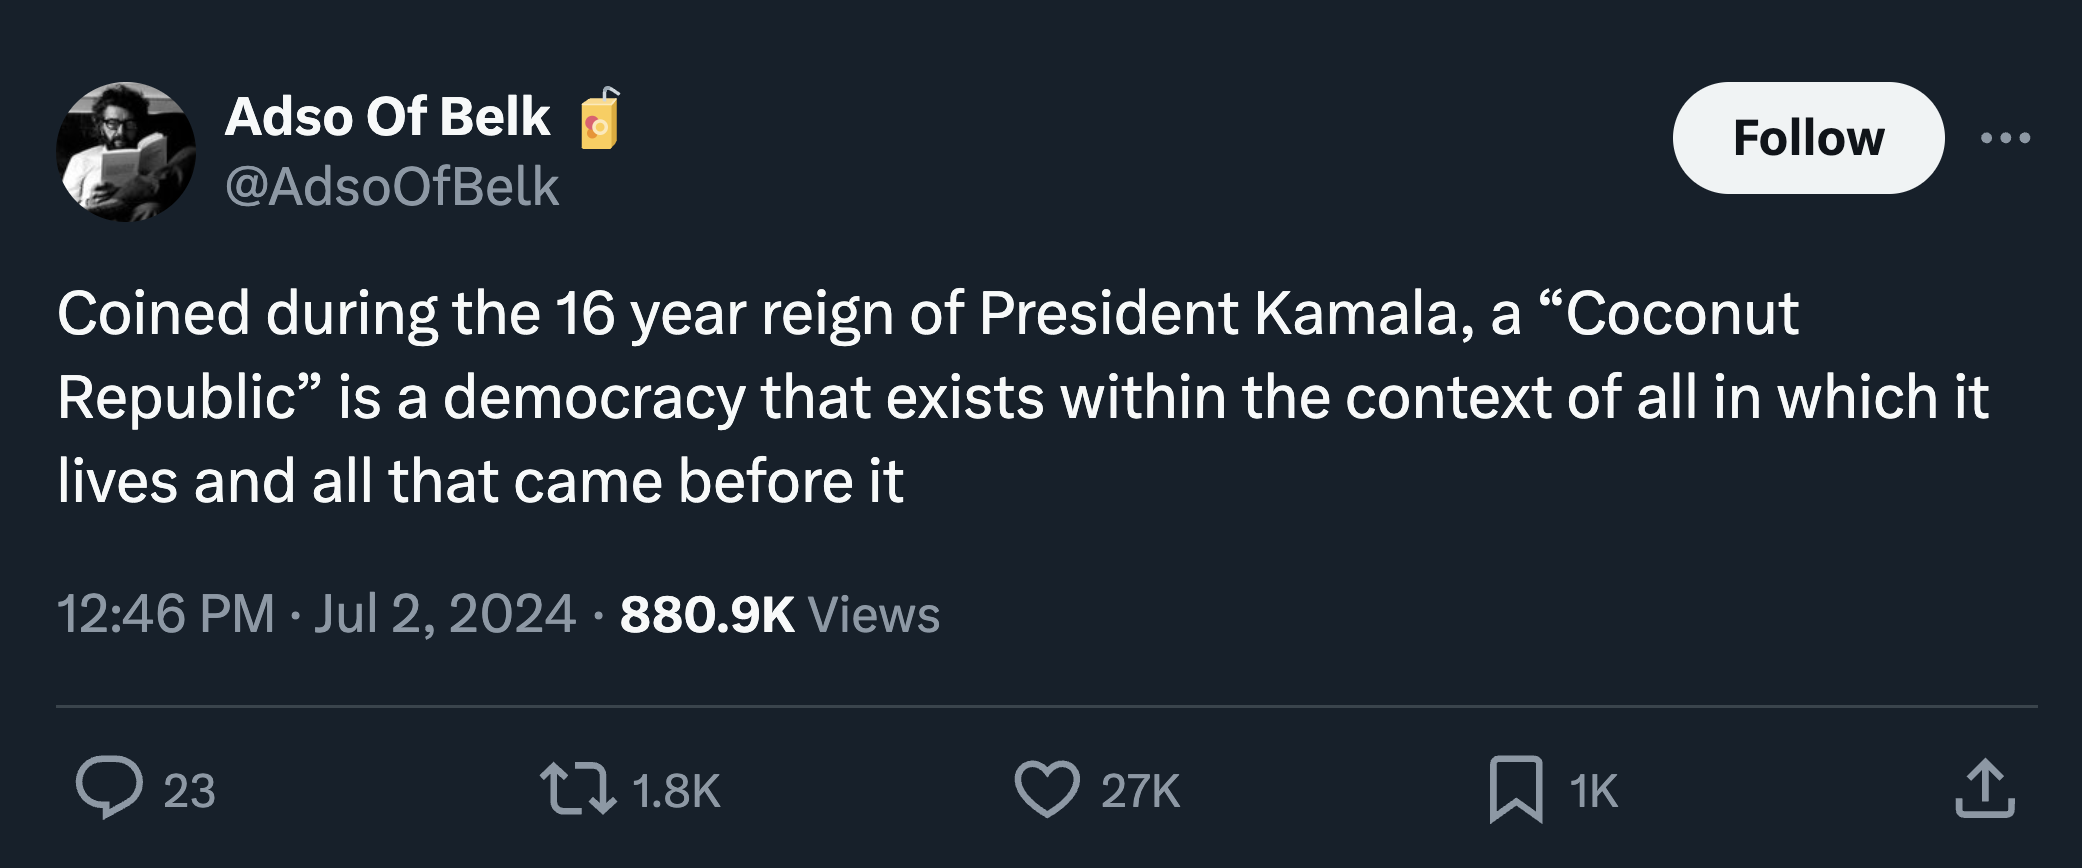 screenshot - Adso Of Belk Coined during the 16 year reign of President Kamala, a "Coconut Republic" is a democracy that exists within the context of all in which it lives and all that came before it Views 23 27K 1K